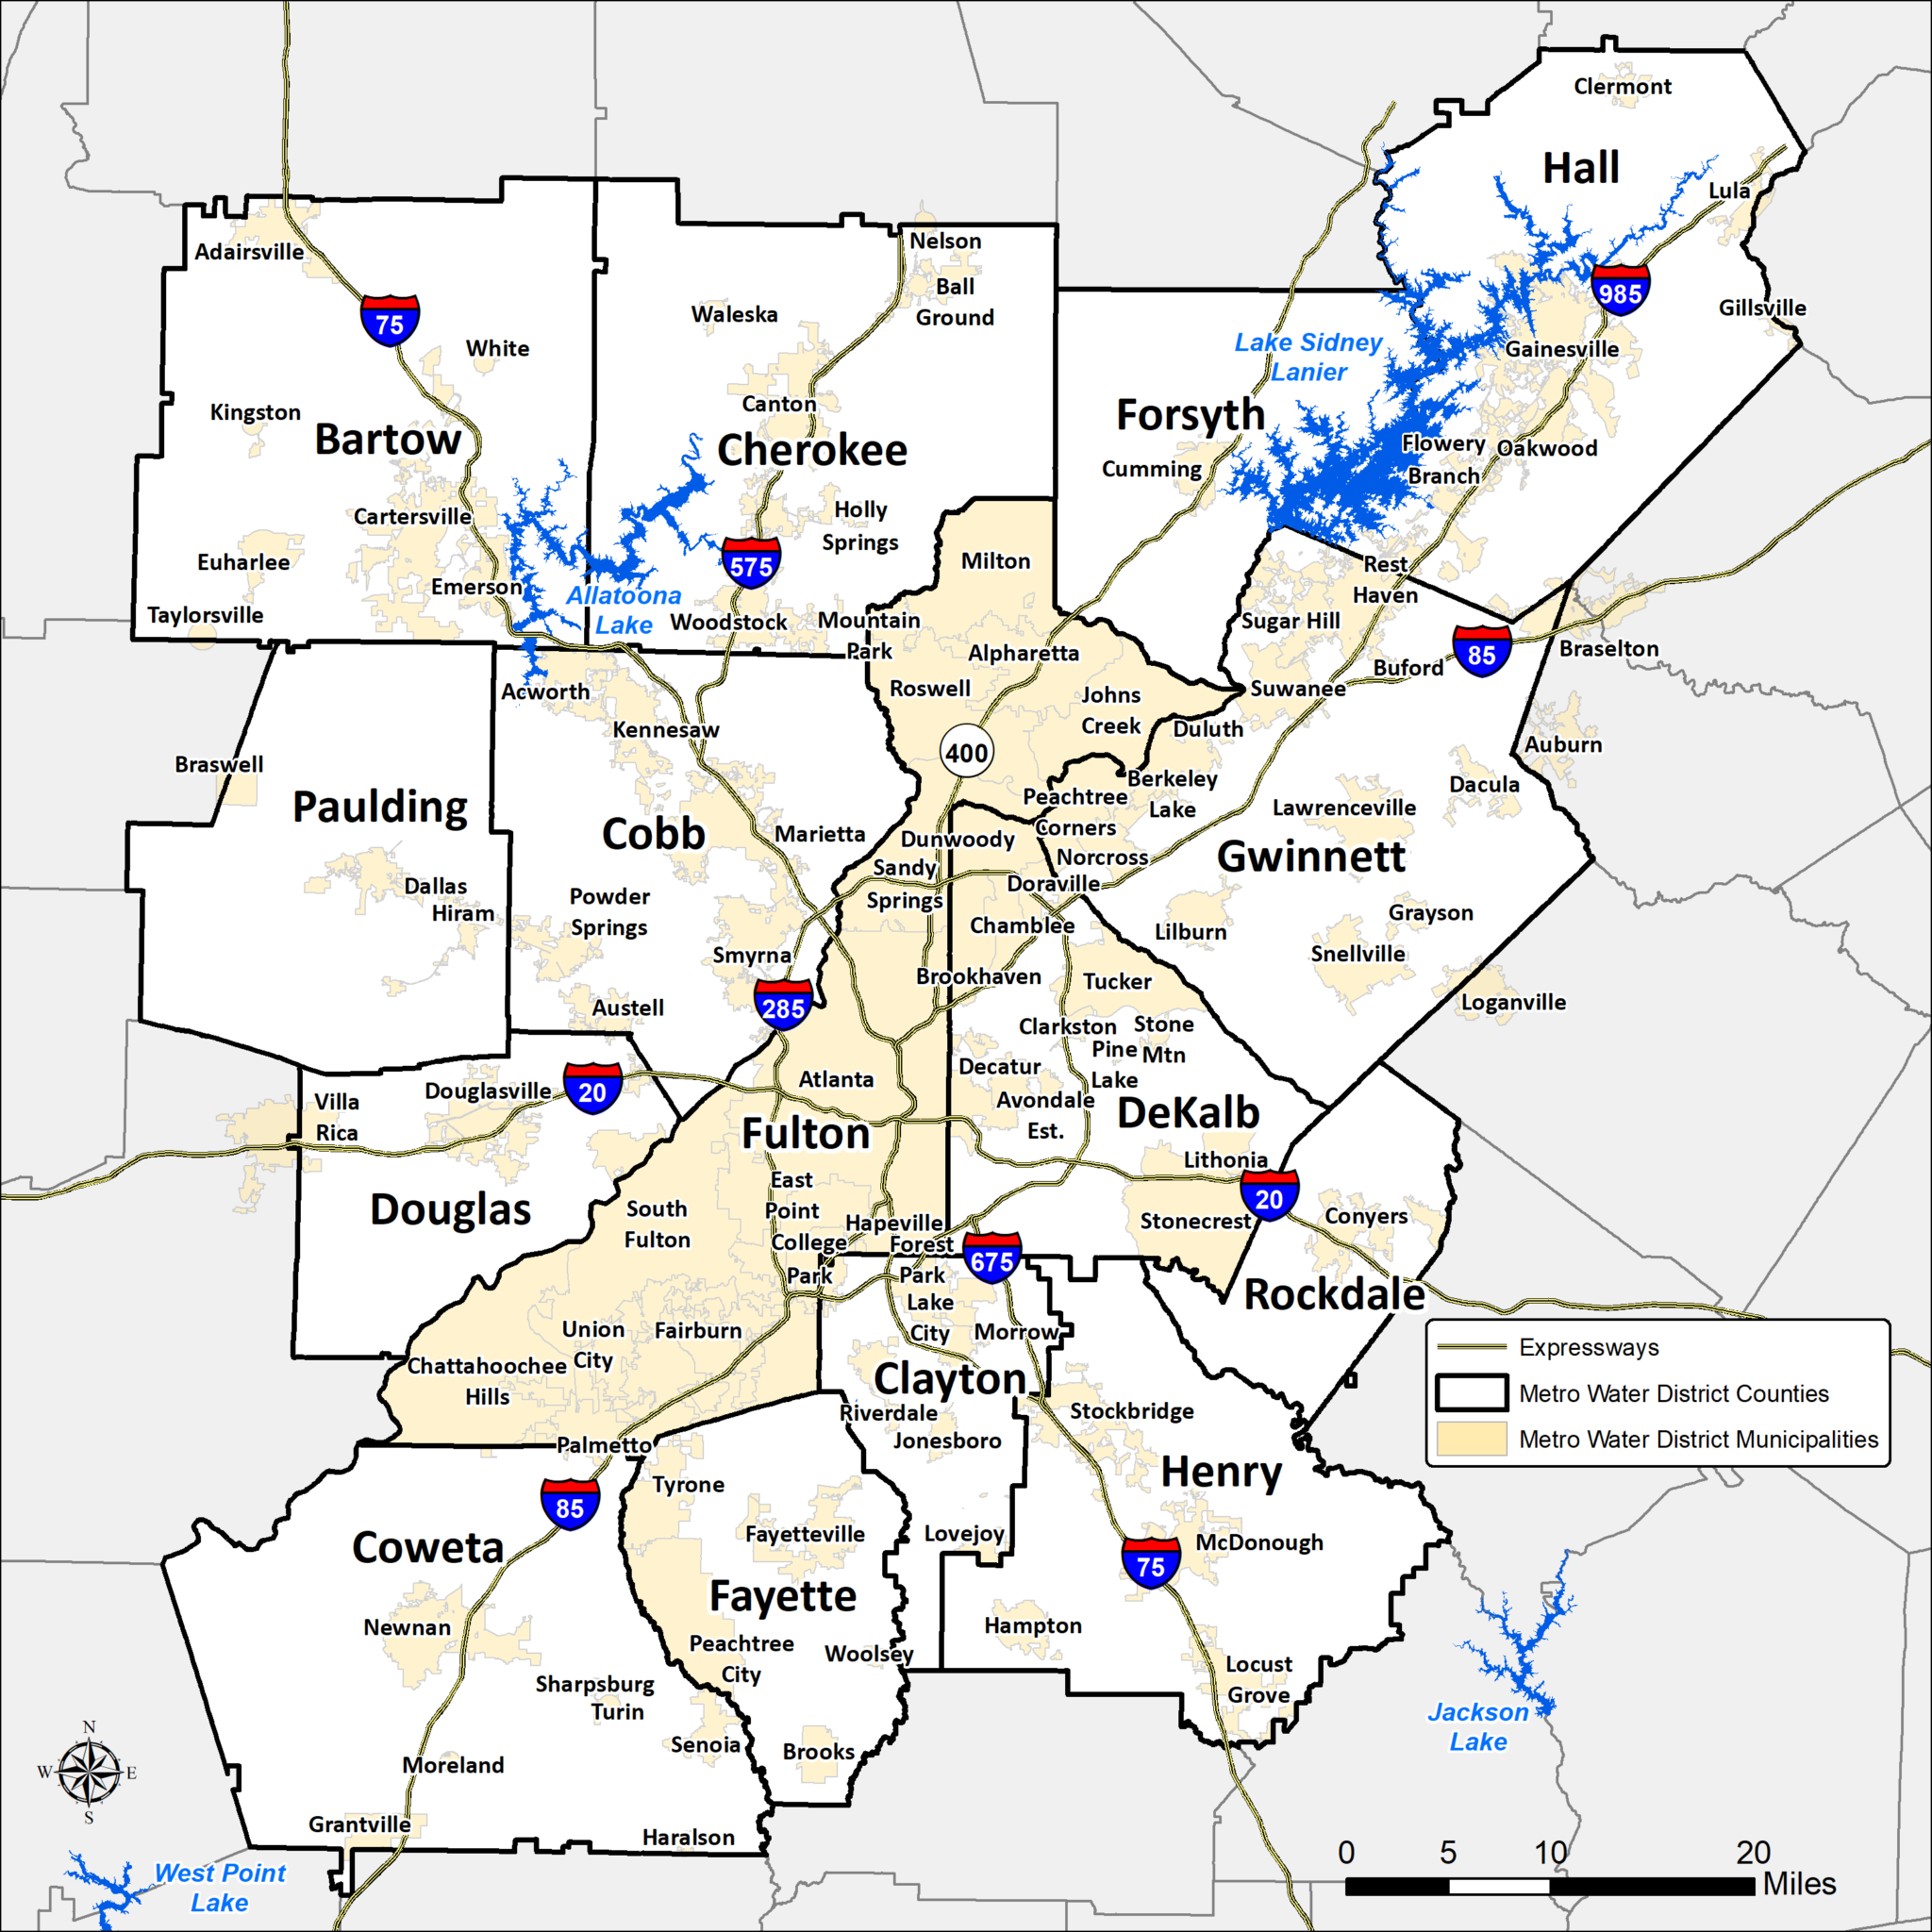 What Is The Metro Water District Metropolitan North Georgia Water Planning District 5756